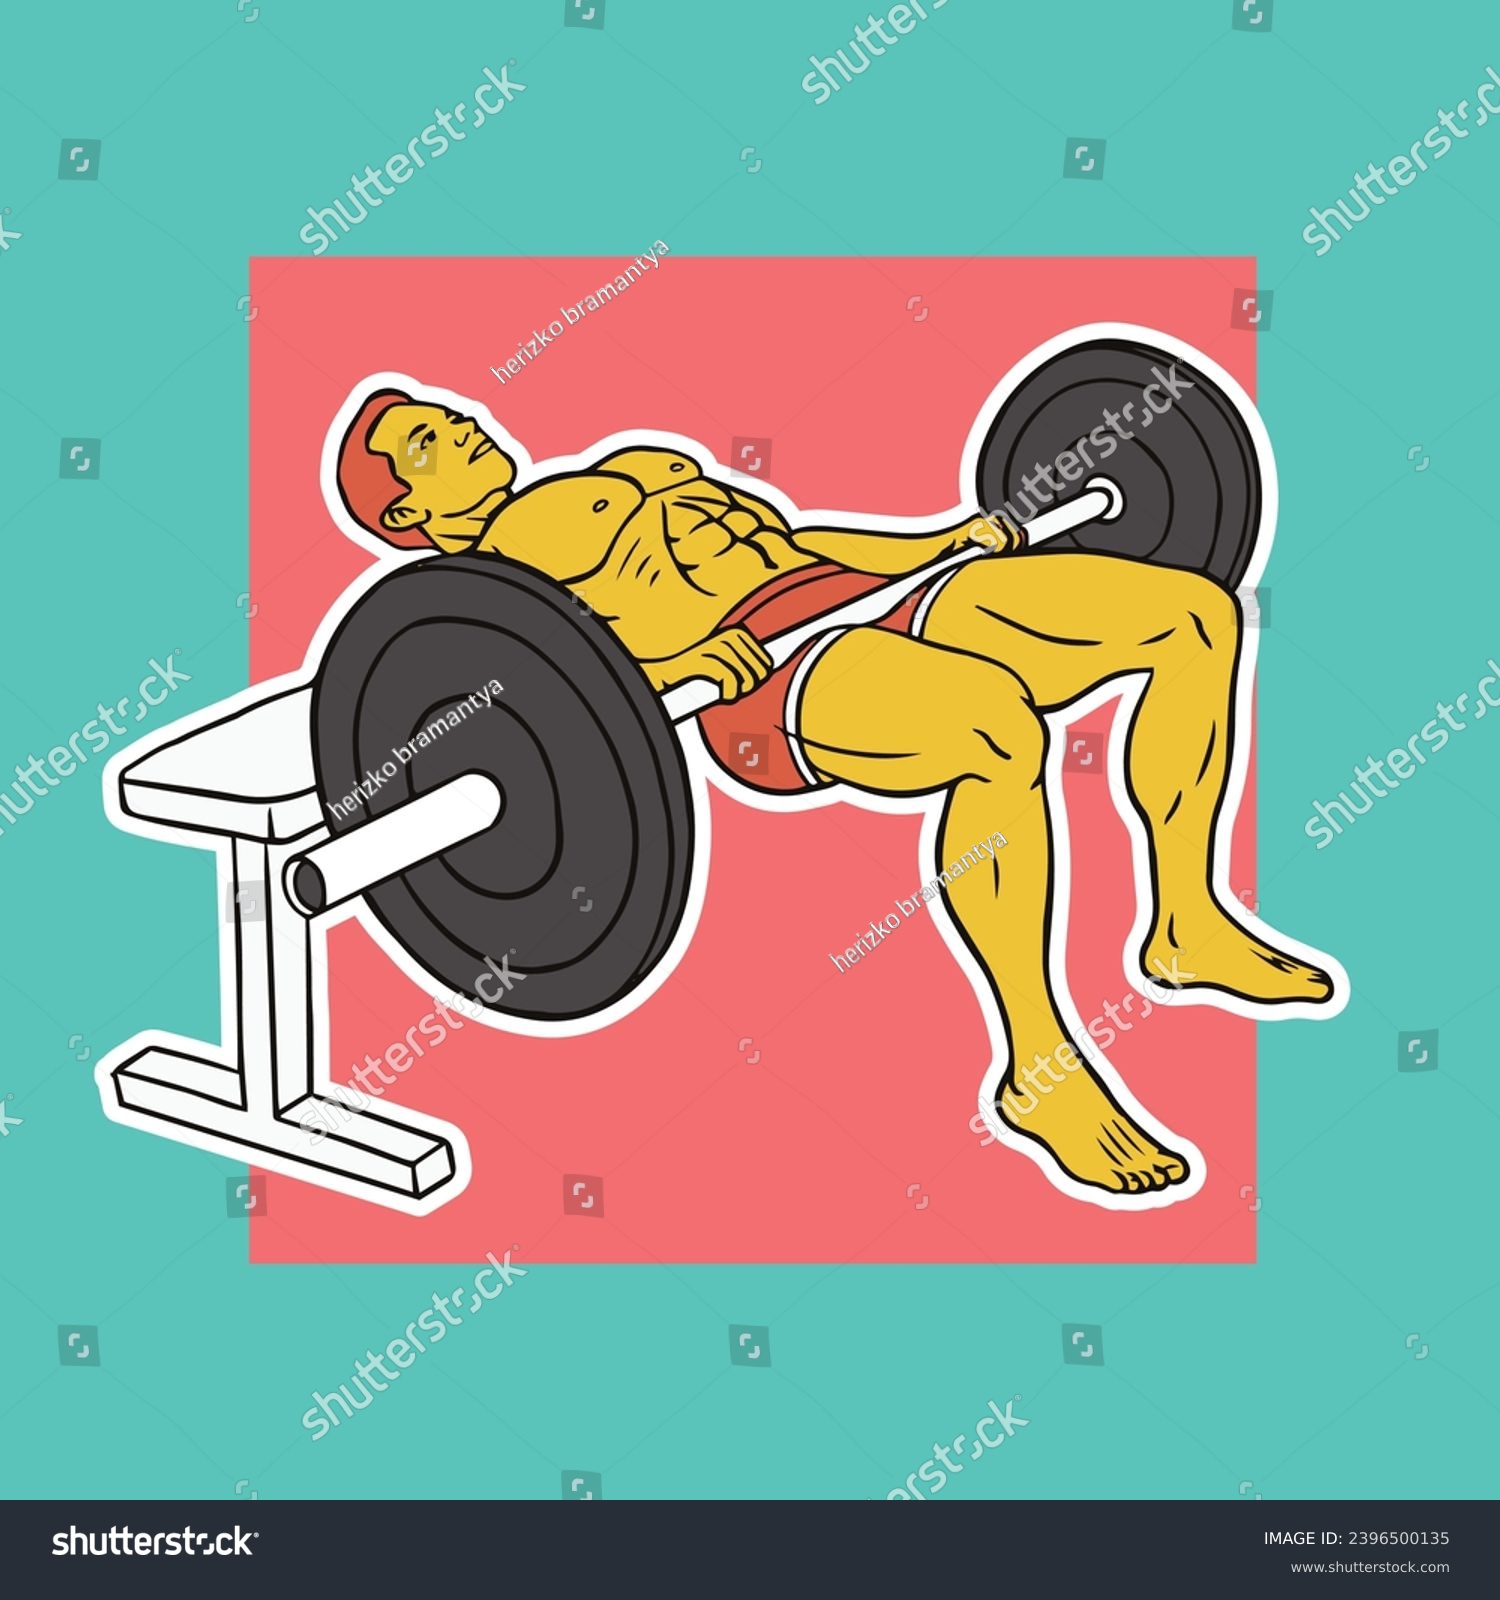 SVG of vector illustration of a powerlifter athlete lifting heavy weights in a lying position to build thigh muscles svg